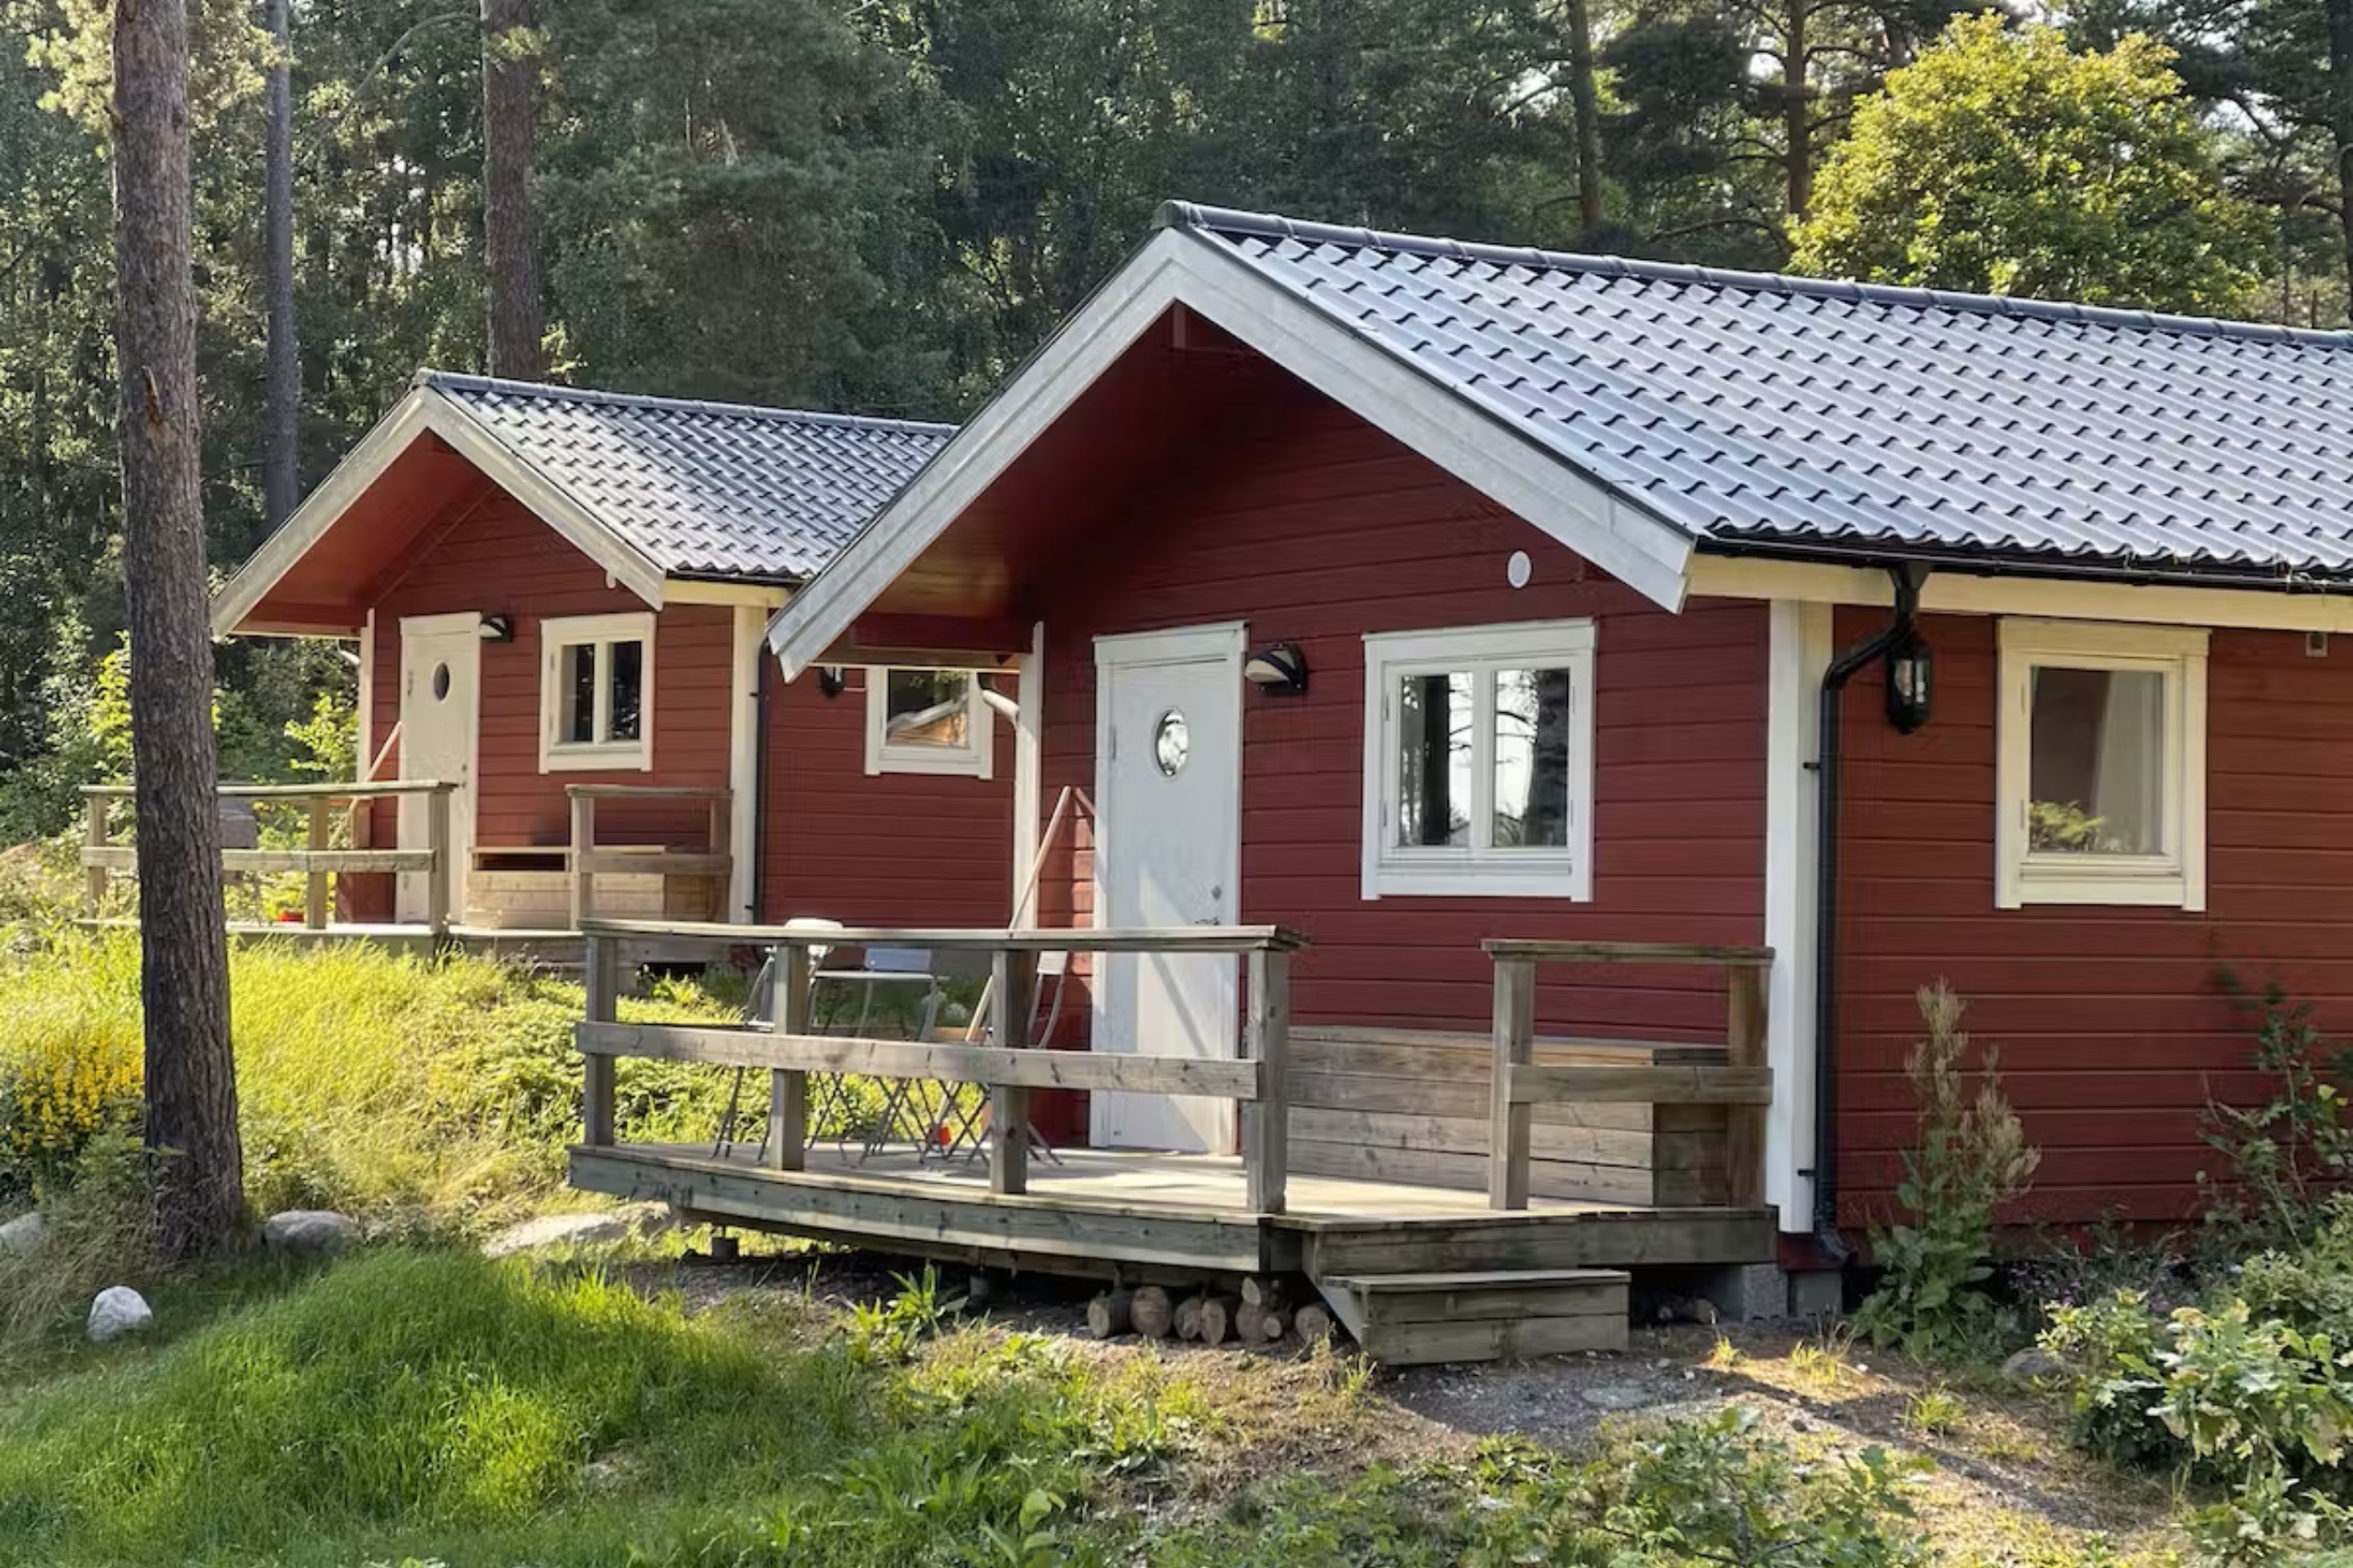 At Vaxholms Camping, you can also stay in a cabin.